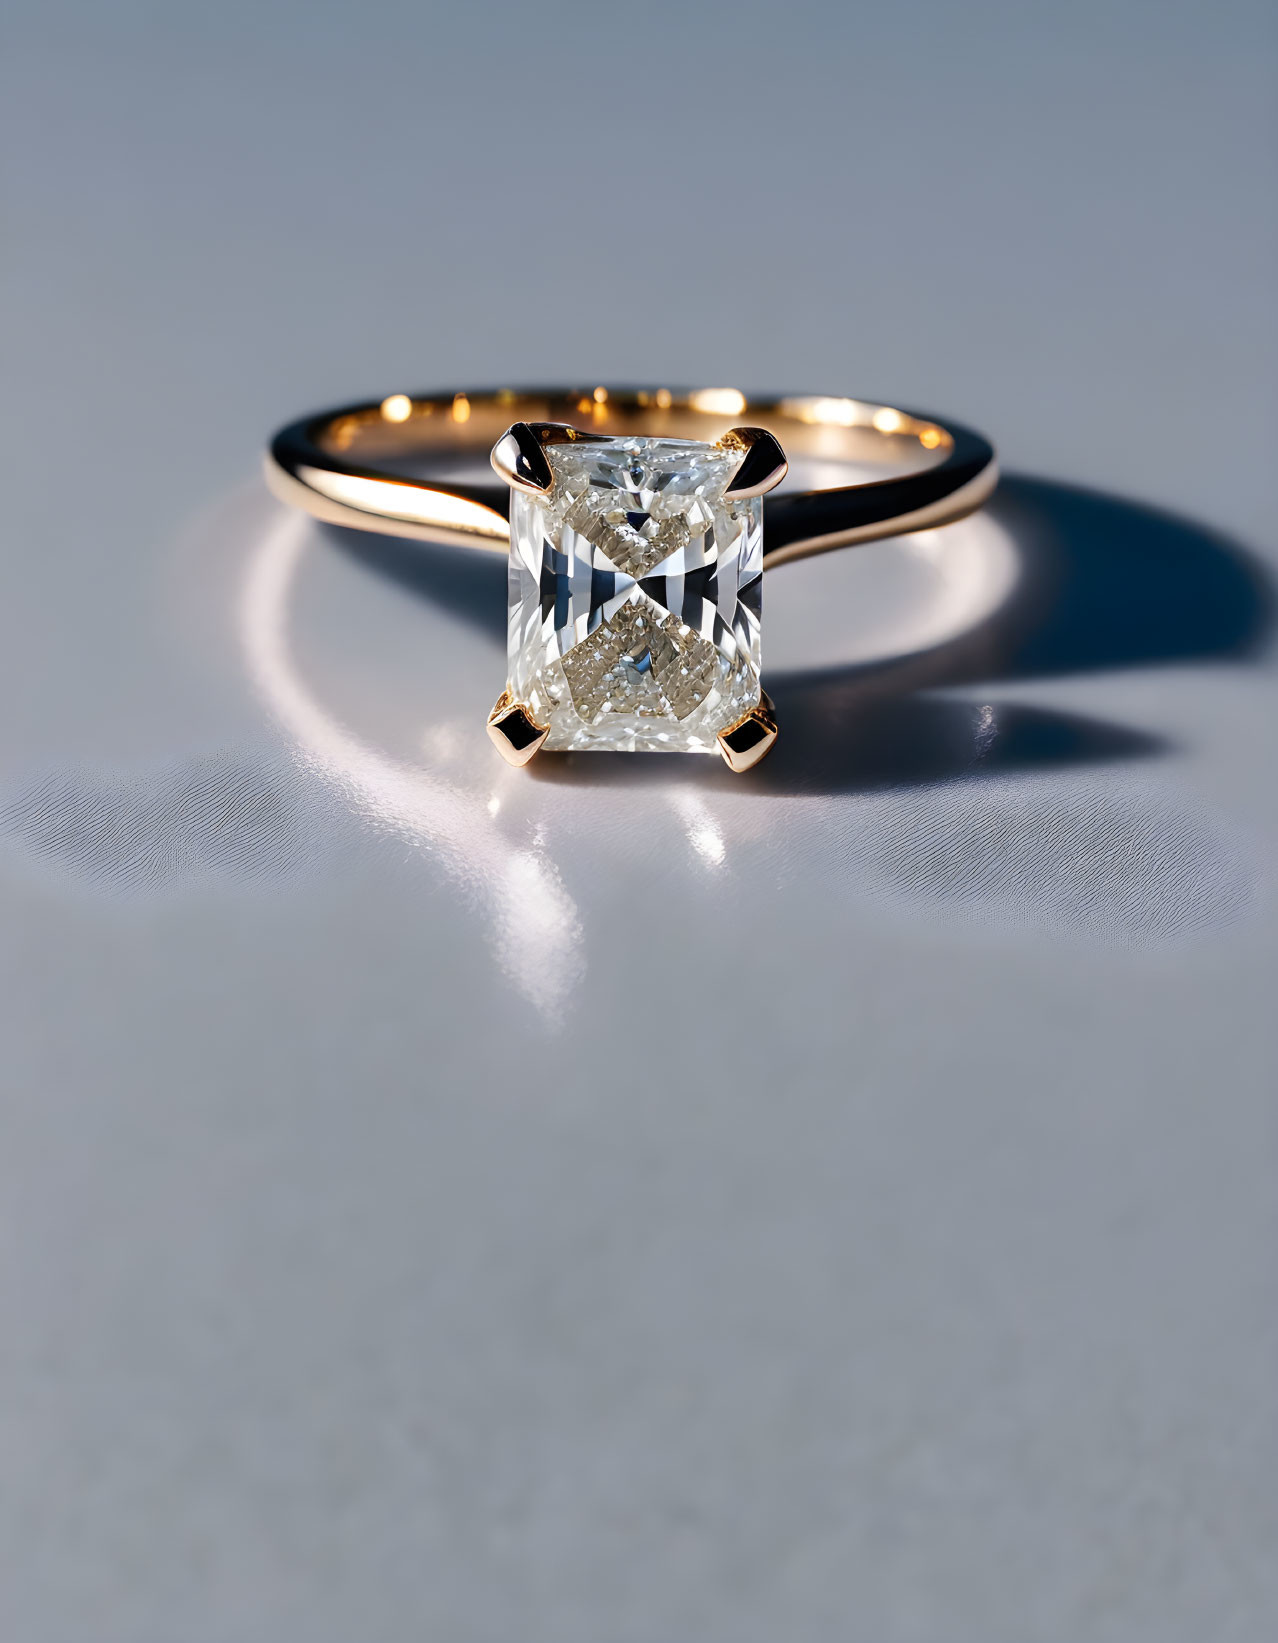 Radiant Cut Diamond Ring on Gold Band with Reflection